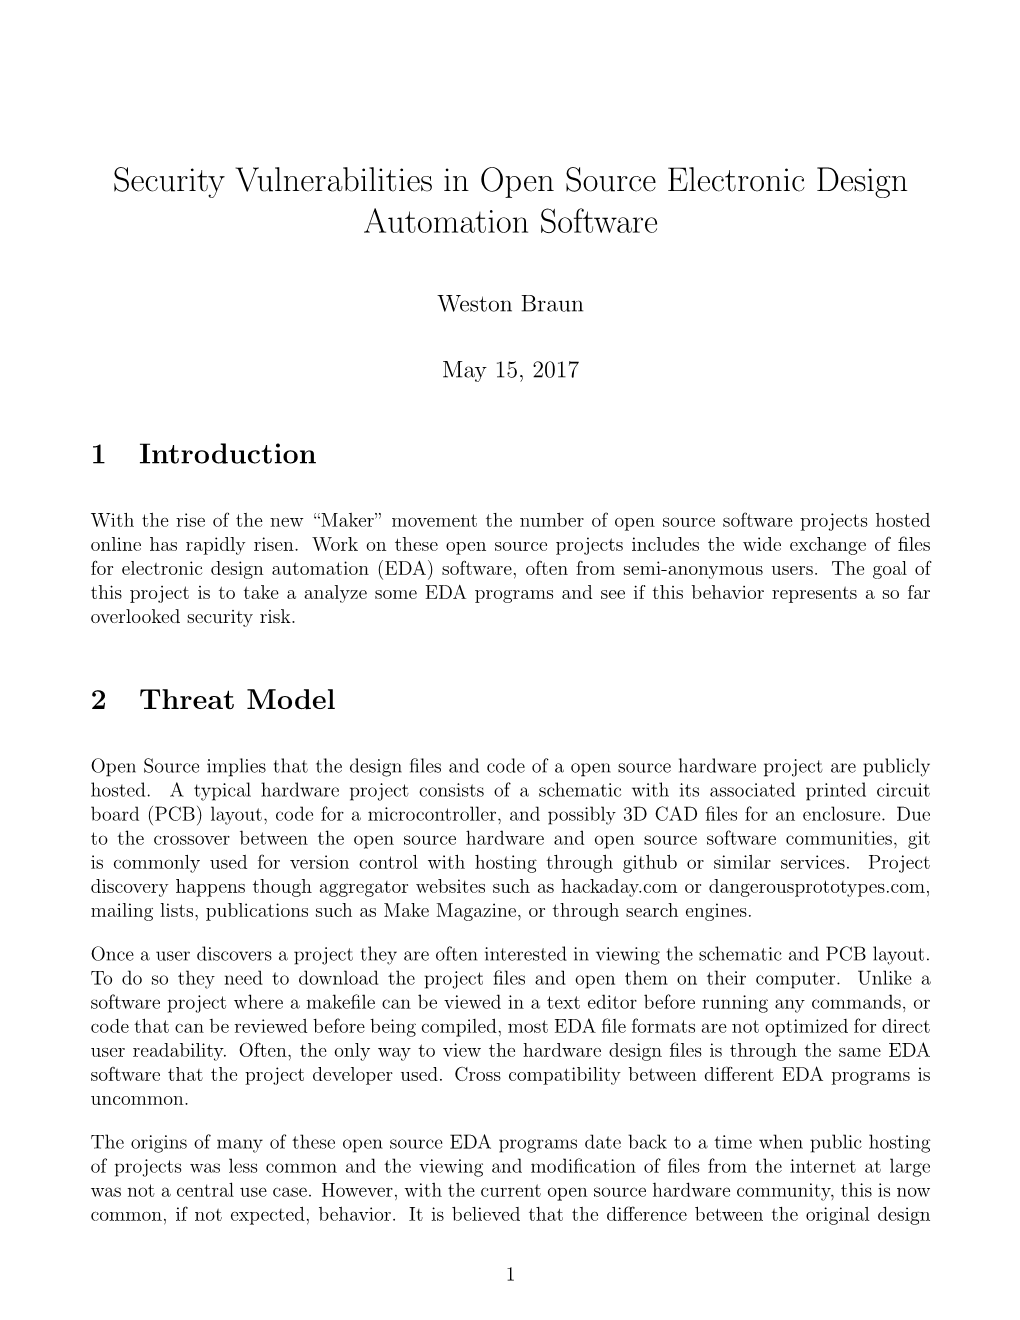 Security Vulnerabilities in Open Source Electronic Design Automation Software